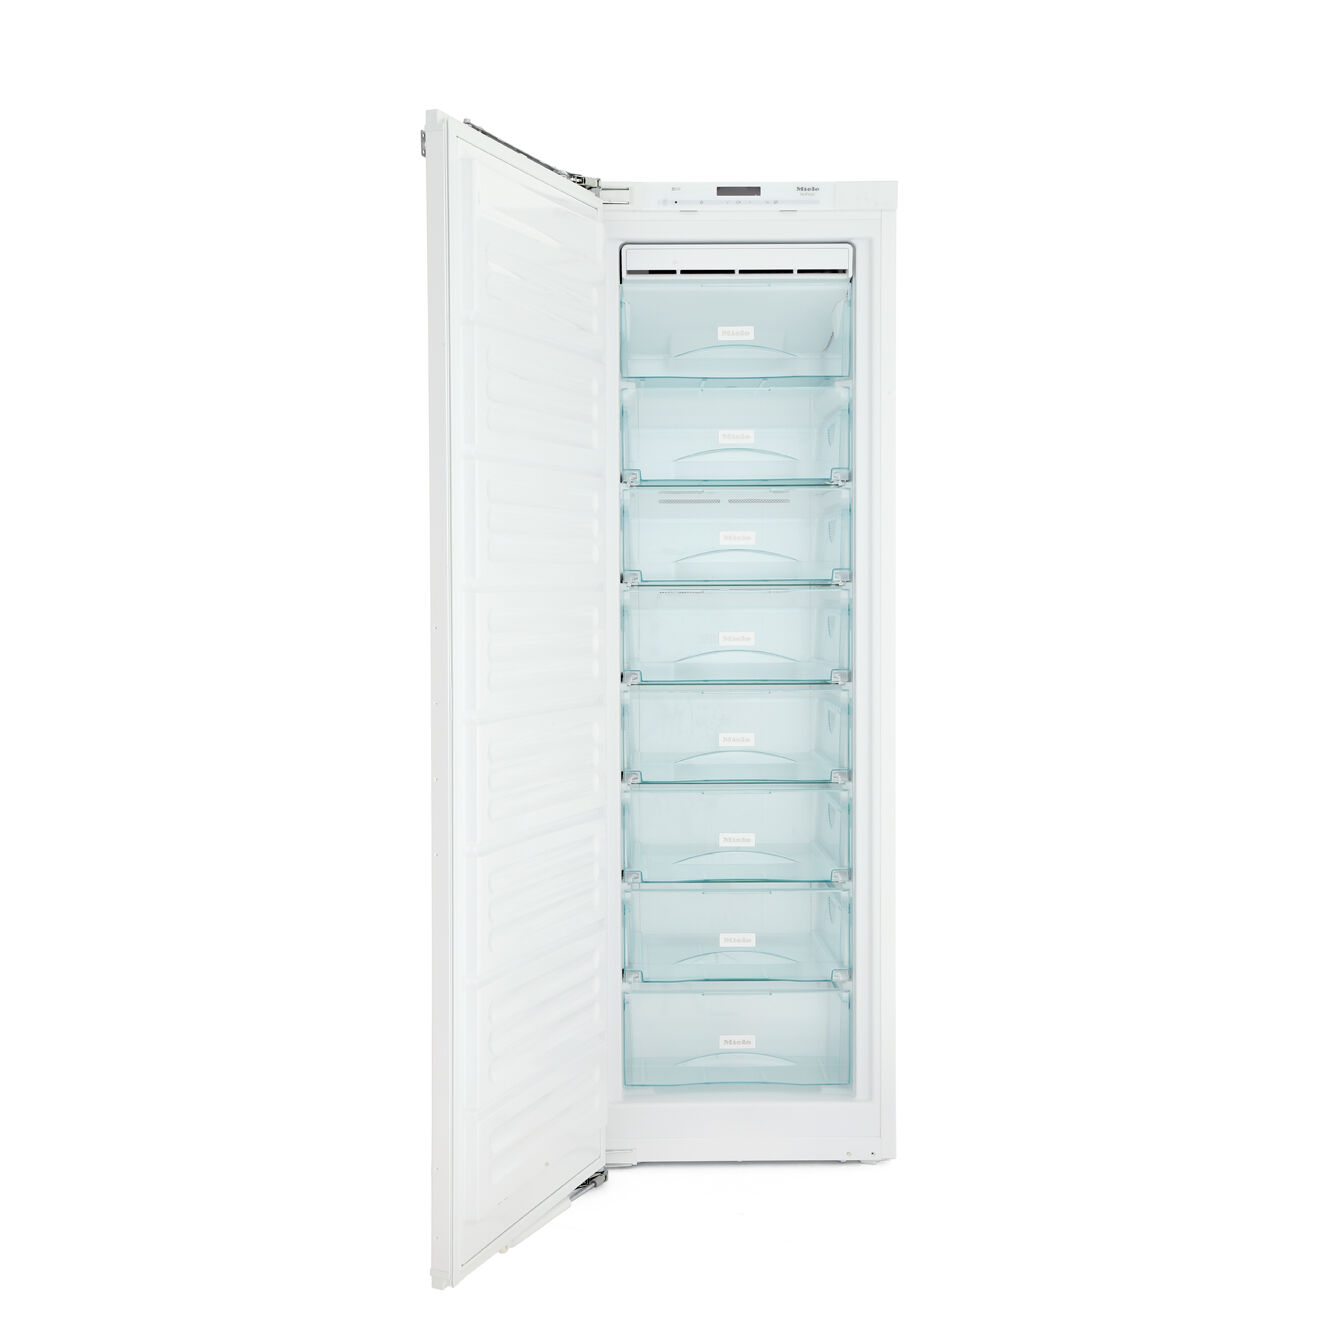 Miele FNS37402i Frost Free Built In Freezer - White